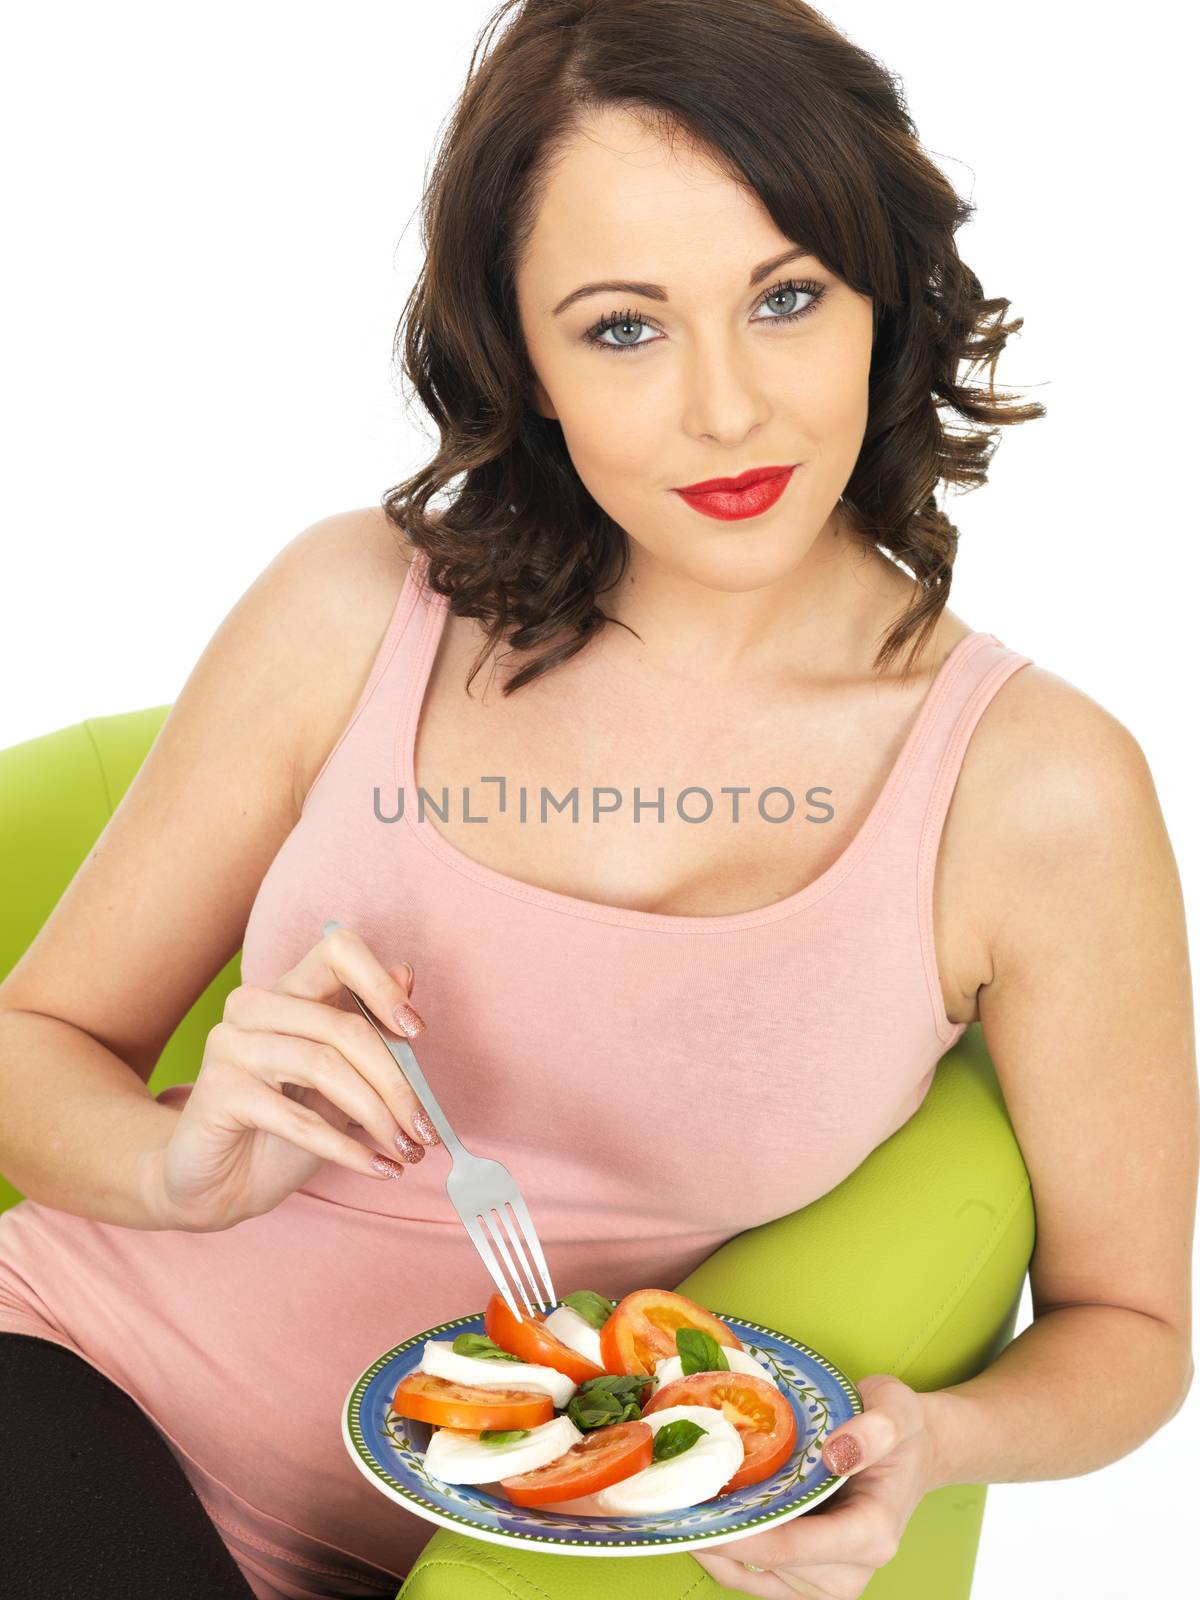 Young Healthy Woman Eating a Mozzarella Cheese and Tomato Salad